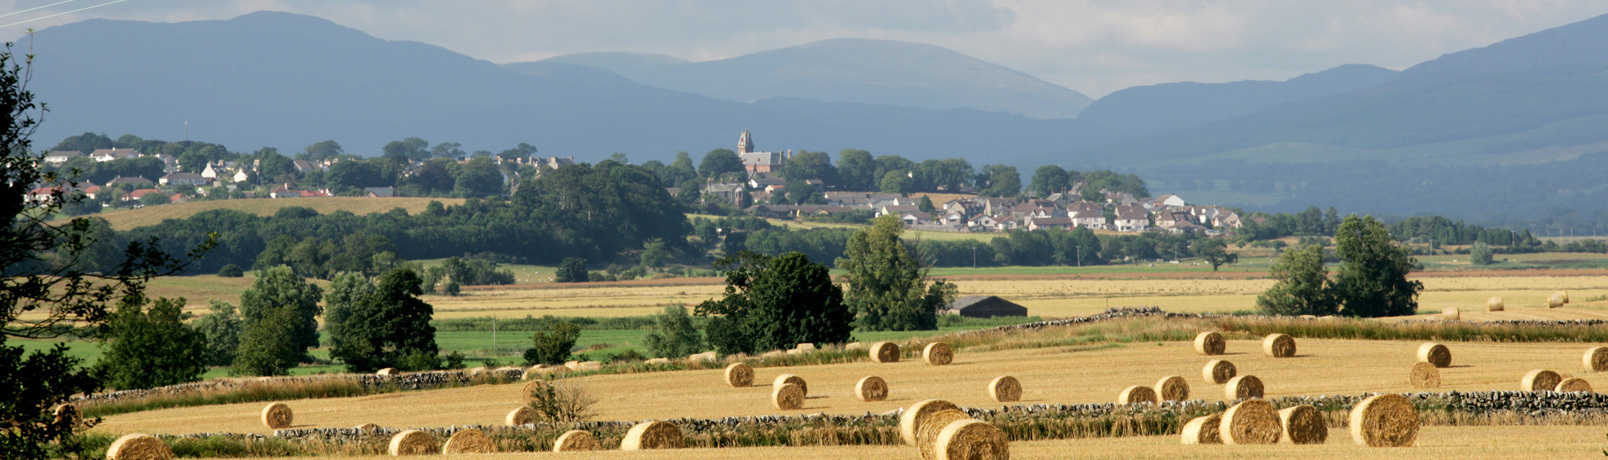 A view of Wigtown taken from afar. Golden yellow fields contain rolled bales of hay. Trees, hedgerows and the Galloway Hills in the distance.